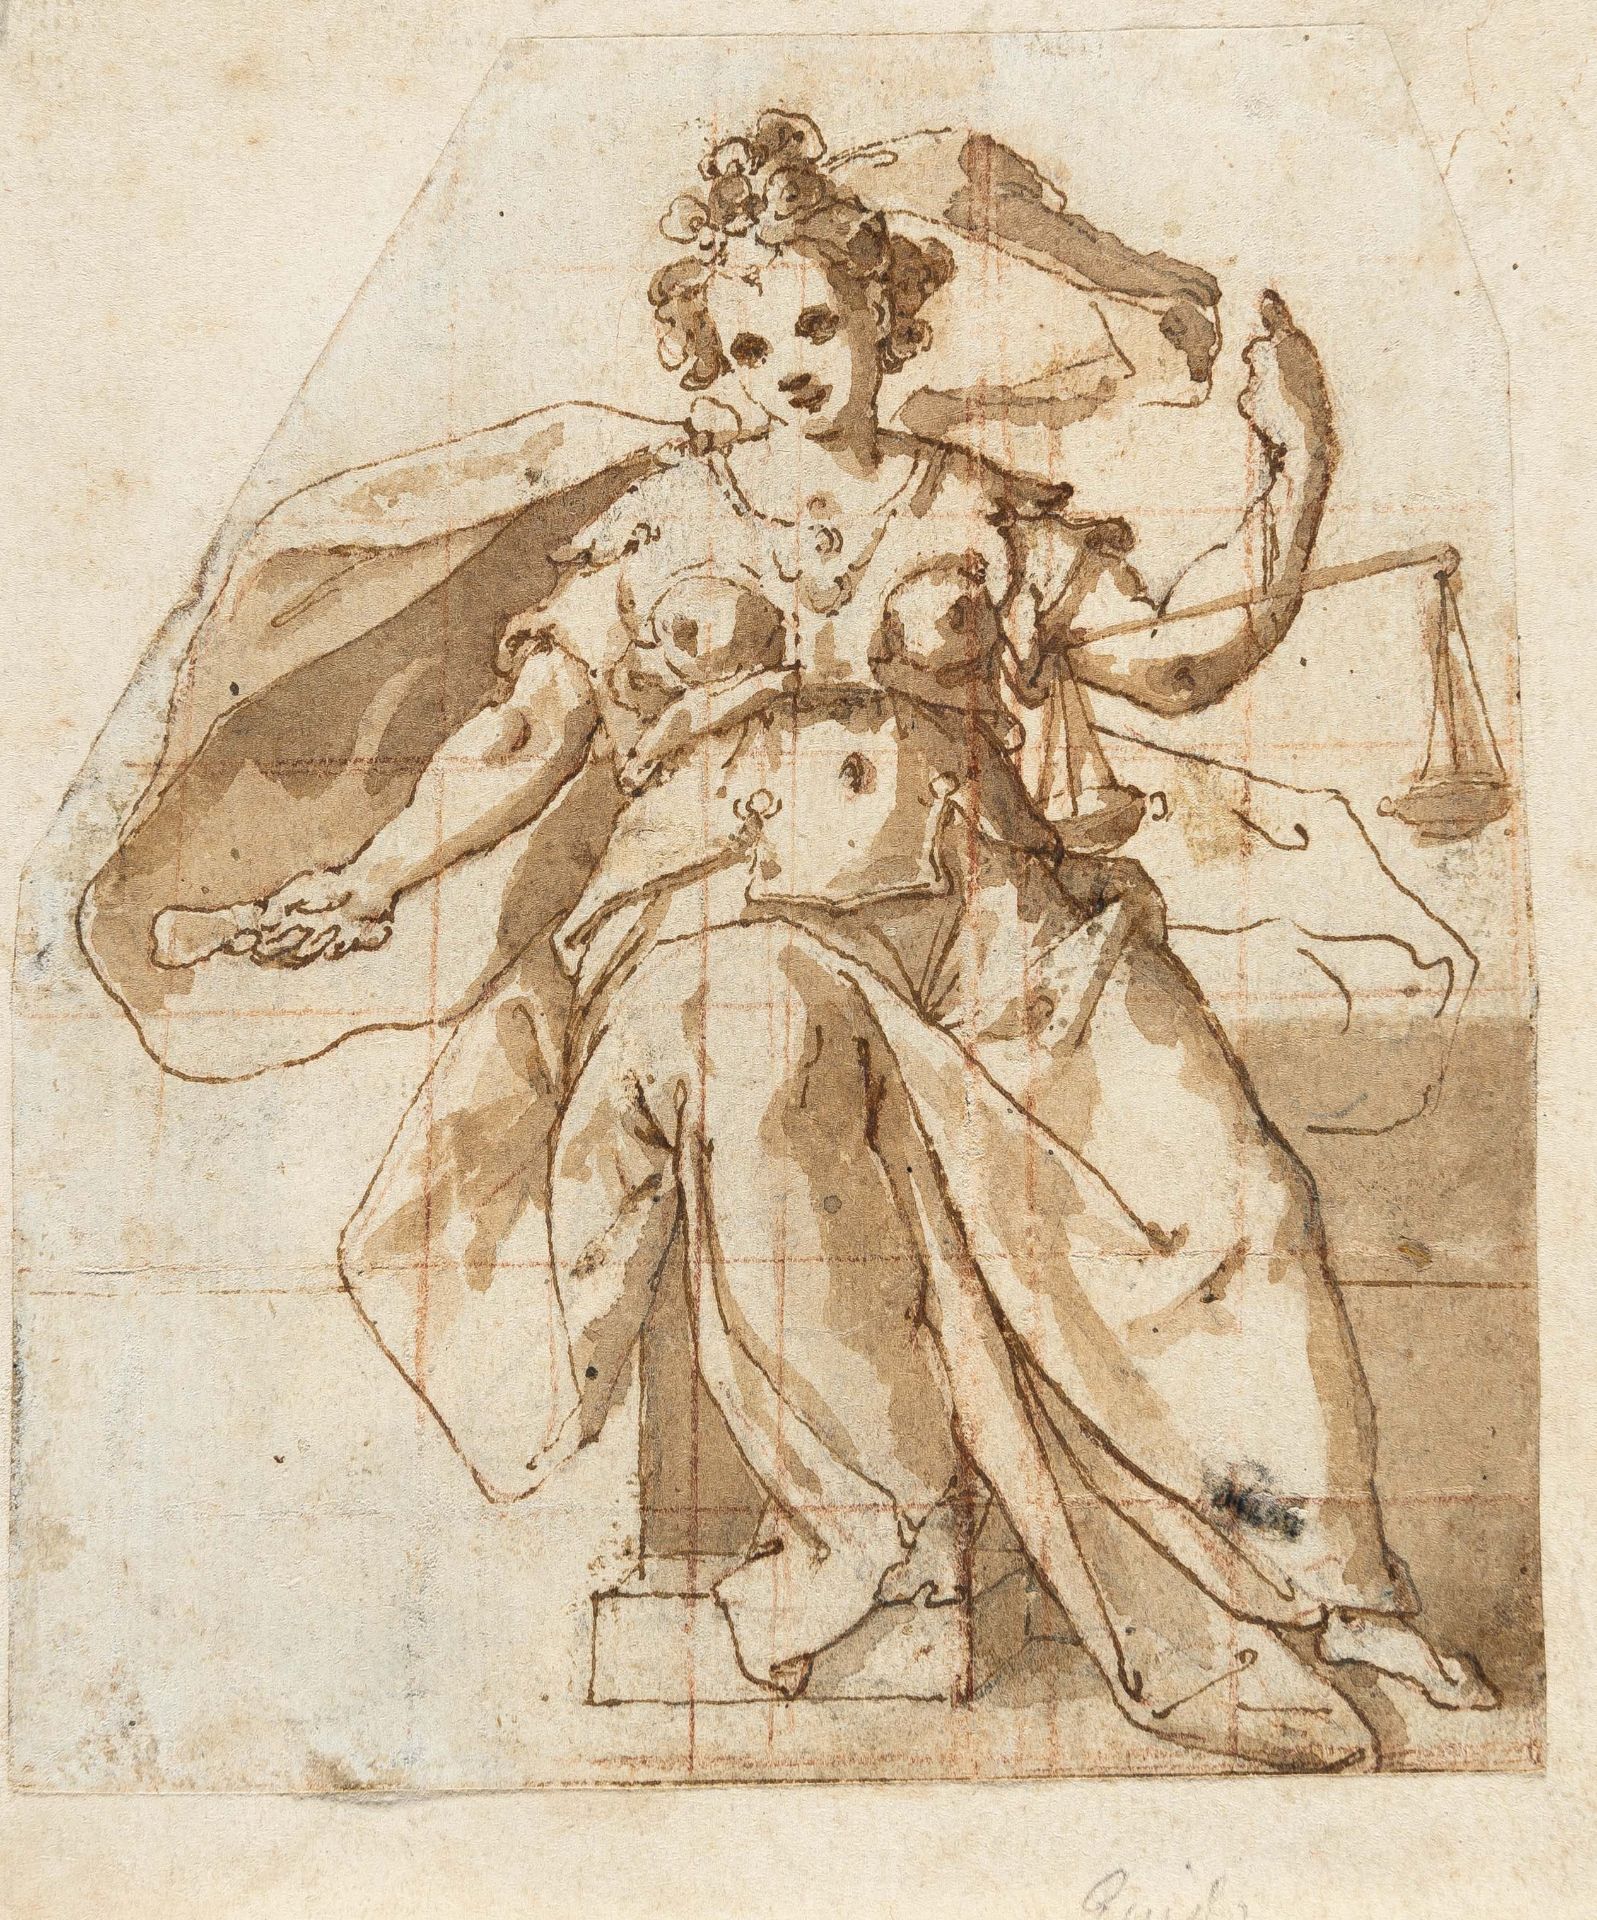 Marco Marchetti, Gen. Marco Da Faenza, Allegory of justice.Pen and brown ink, brown wash over traces